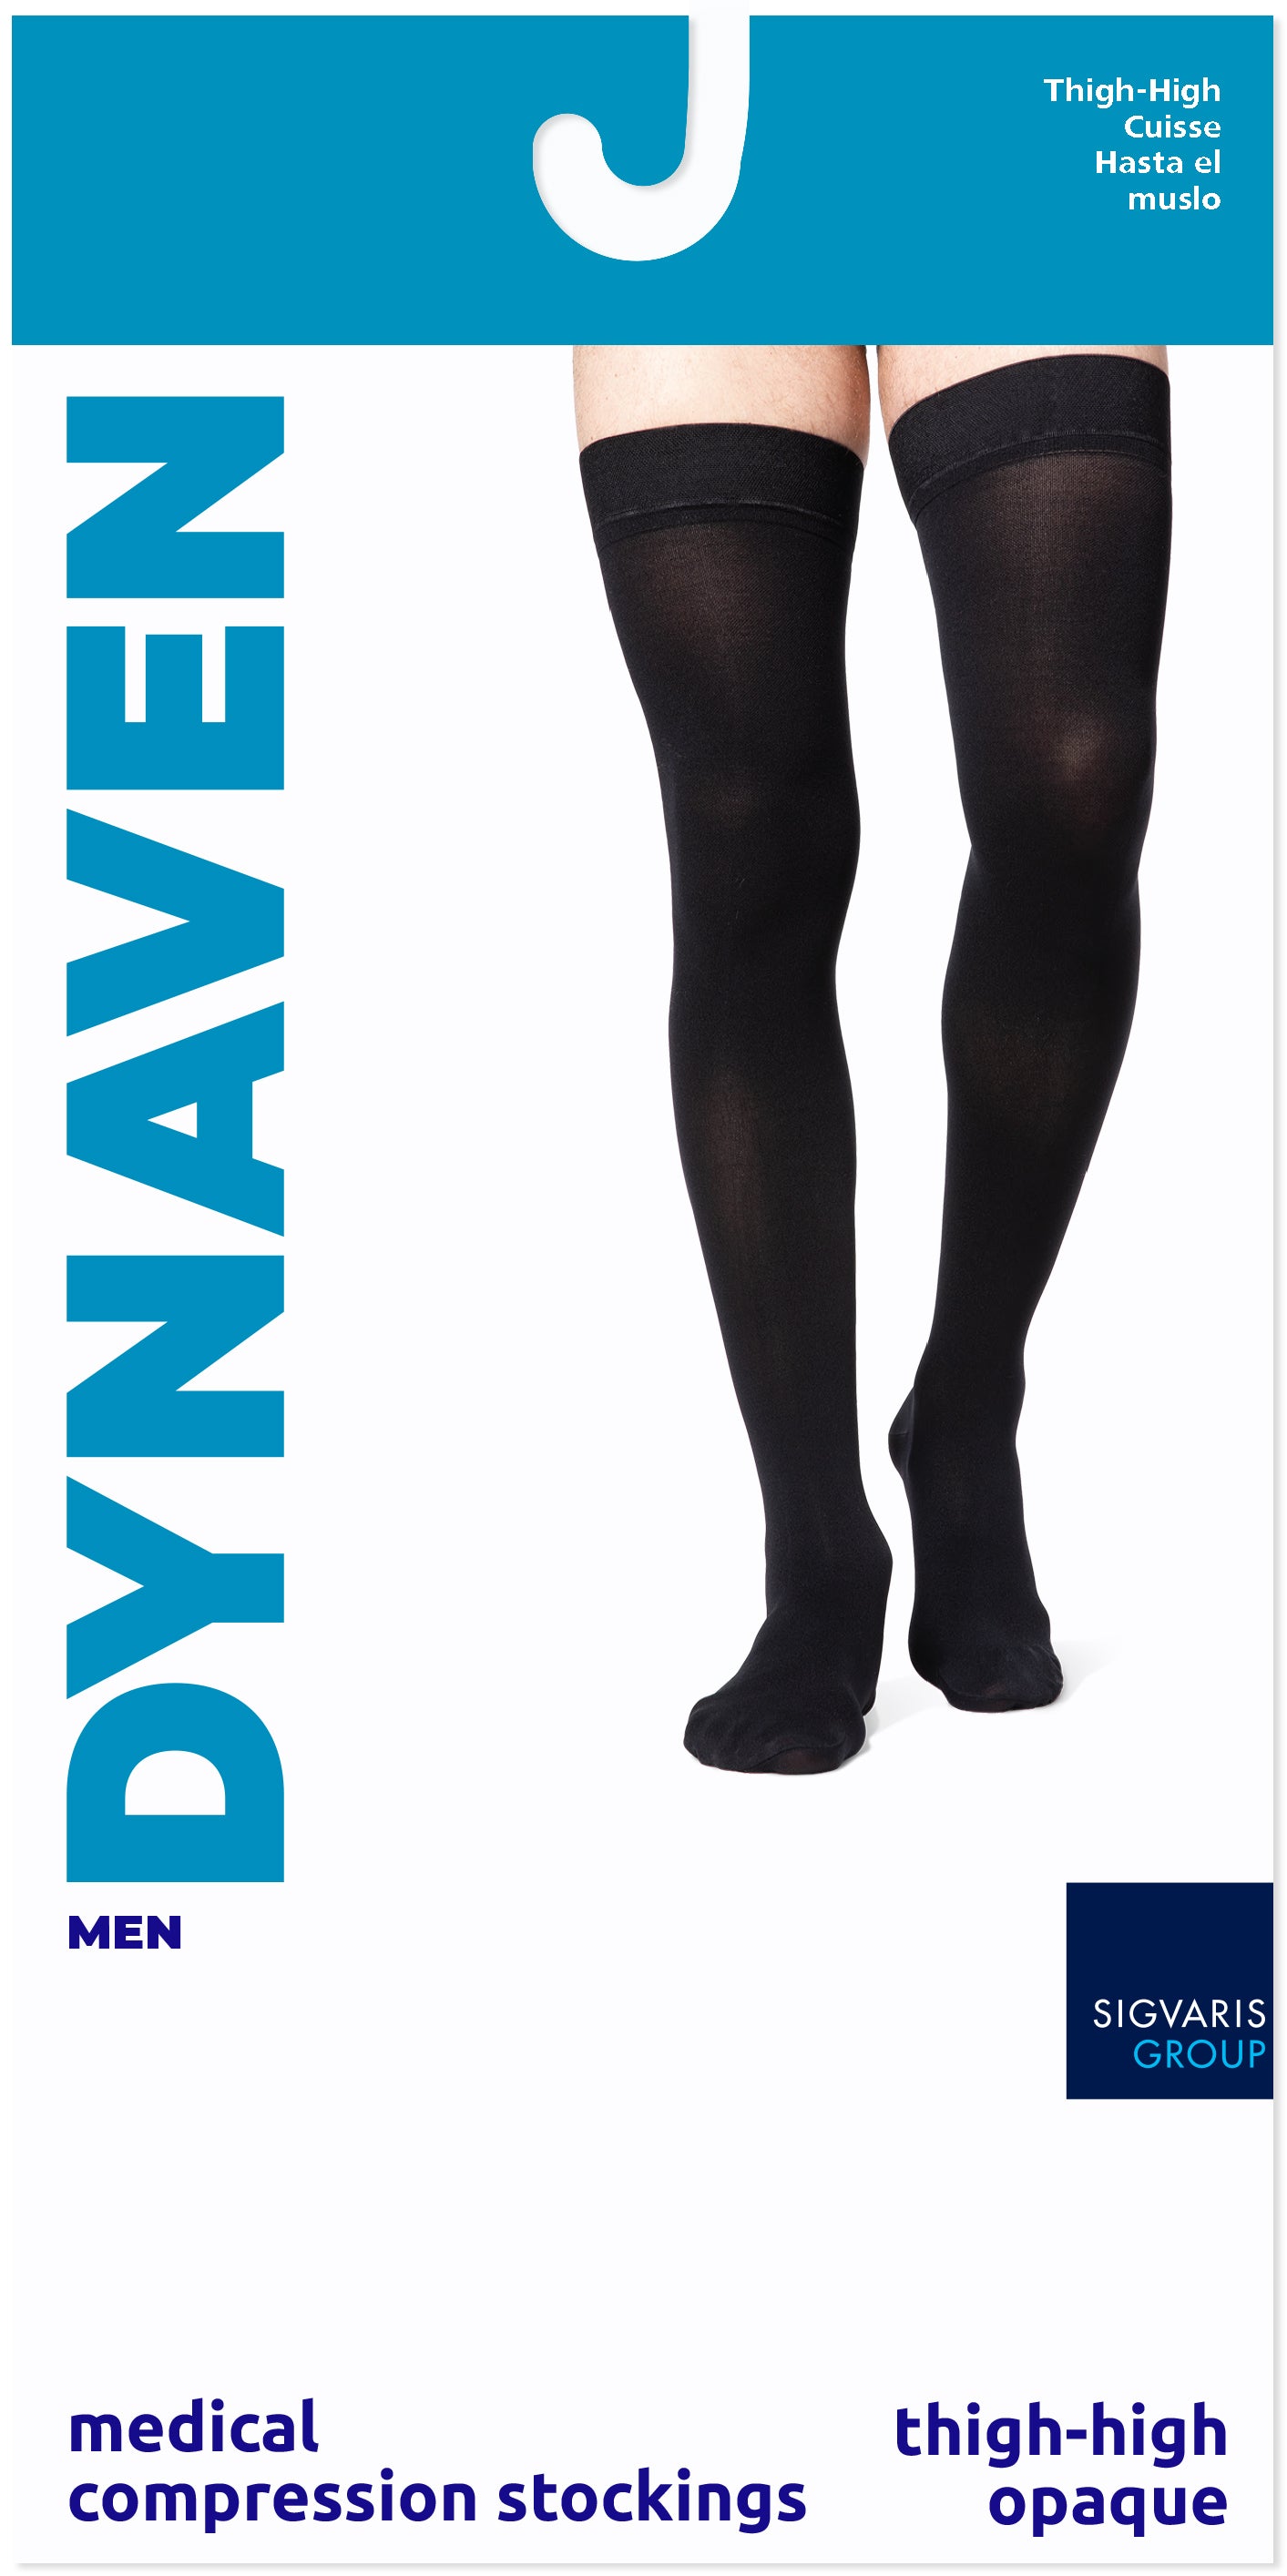 Sigvaris Dynaven Women's 20-30mmhg Knee High Compression Stockings